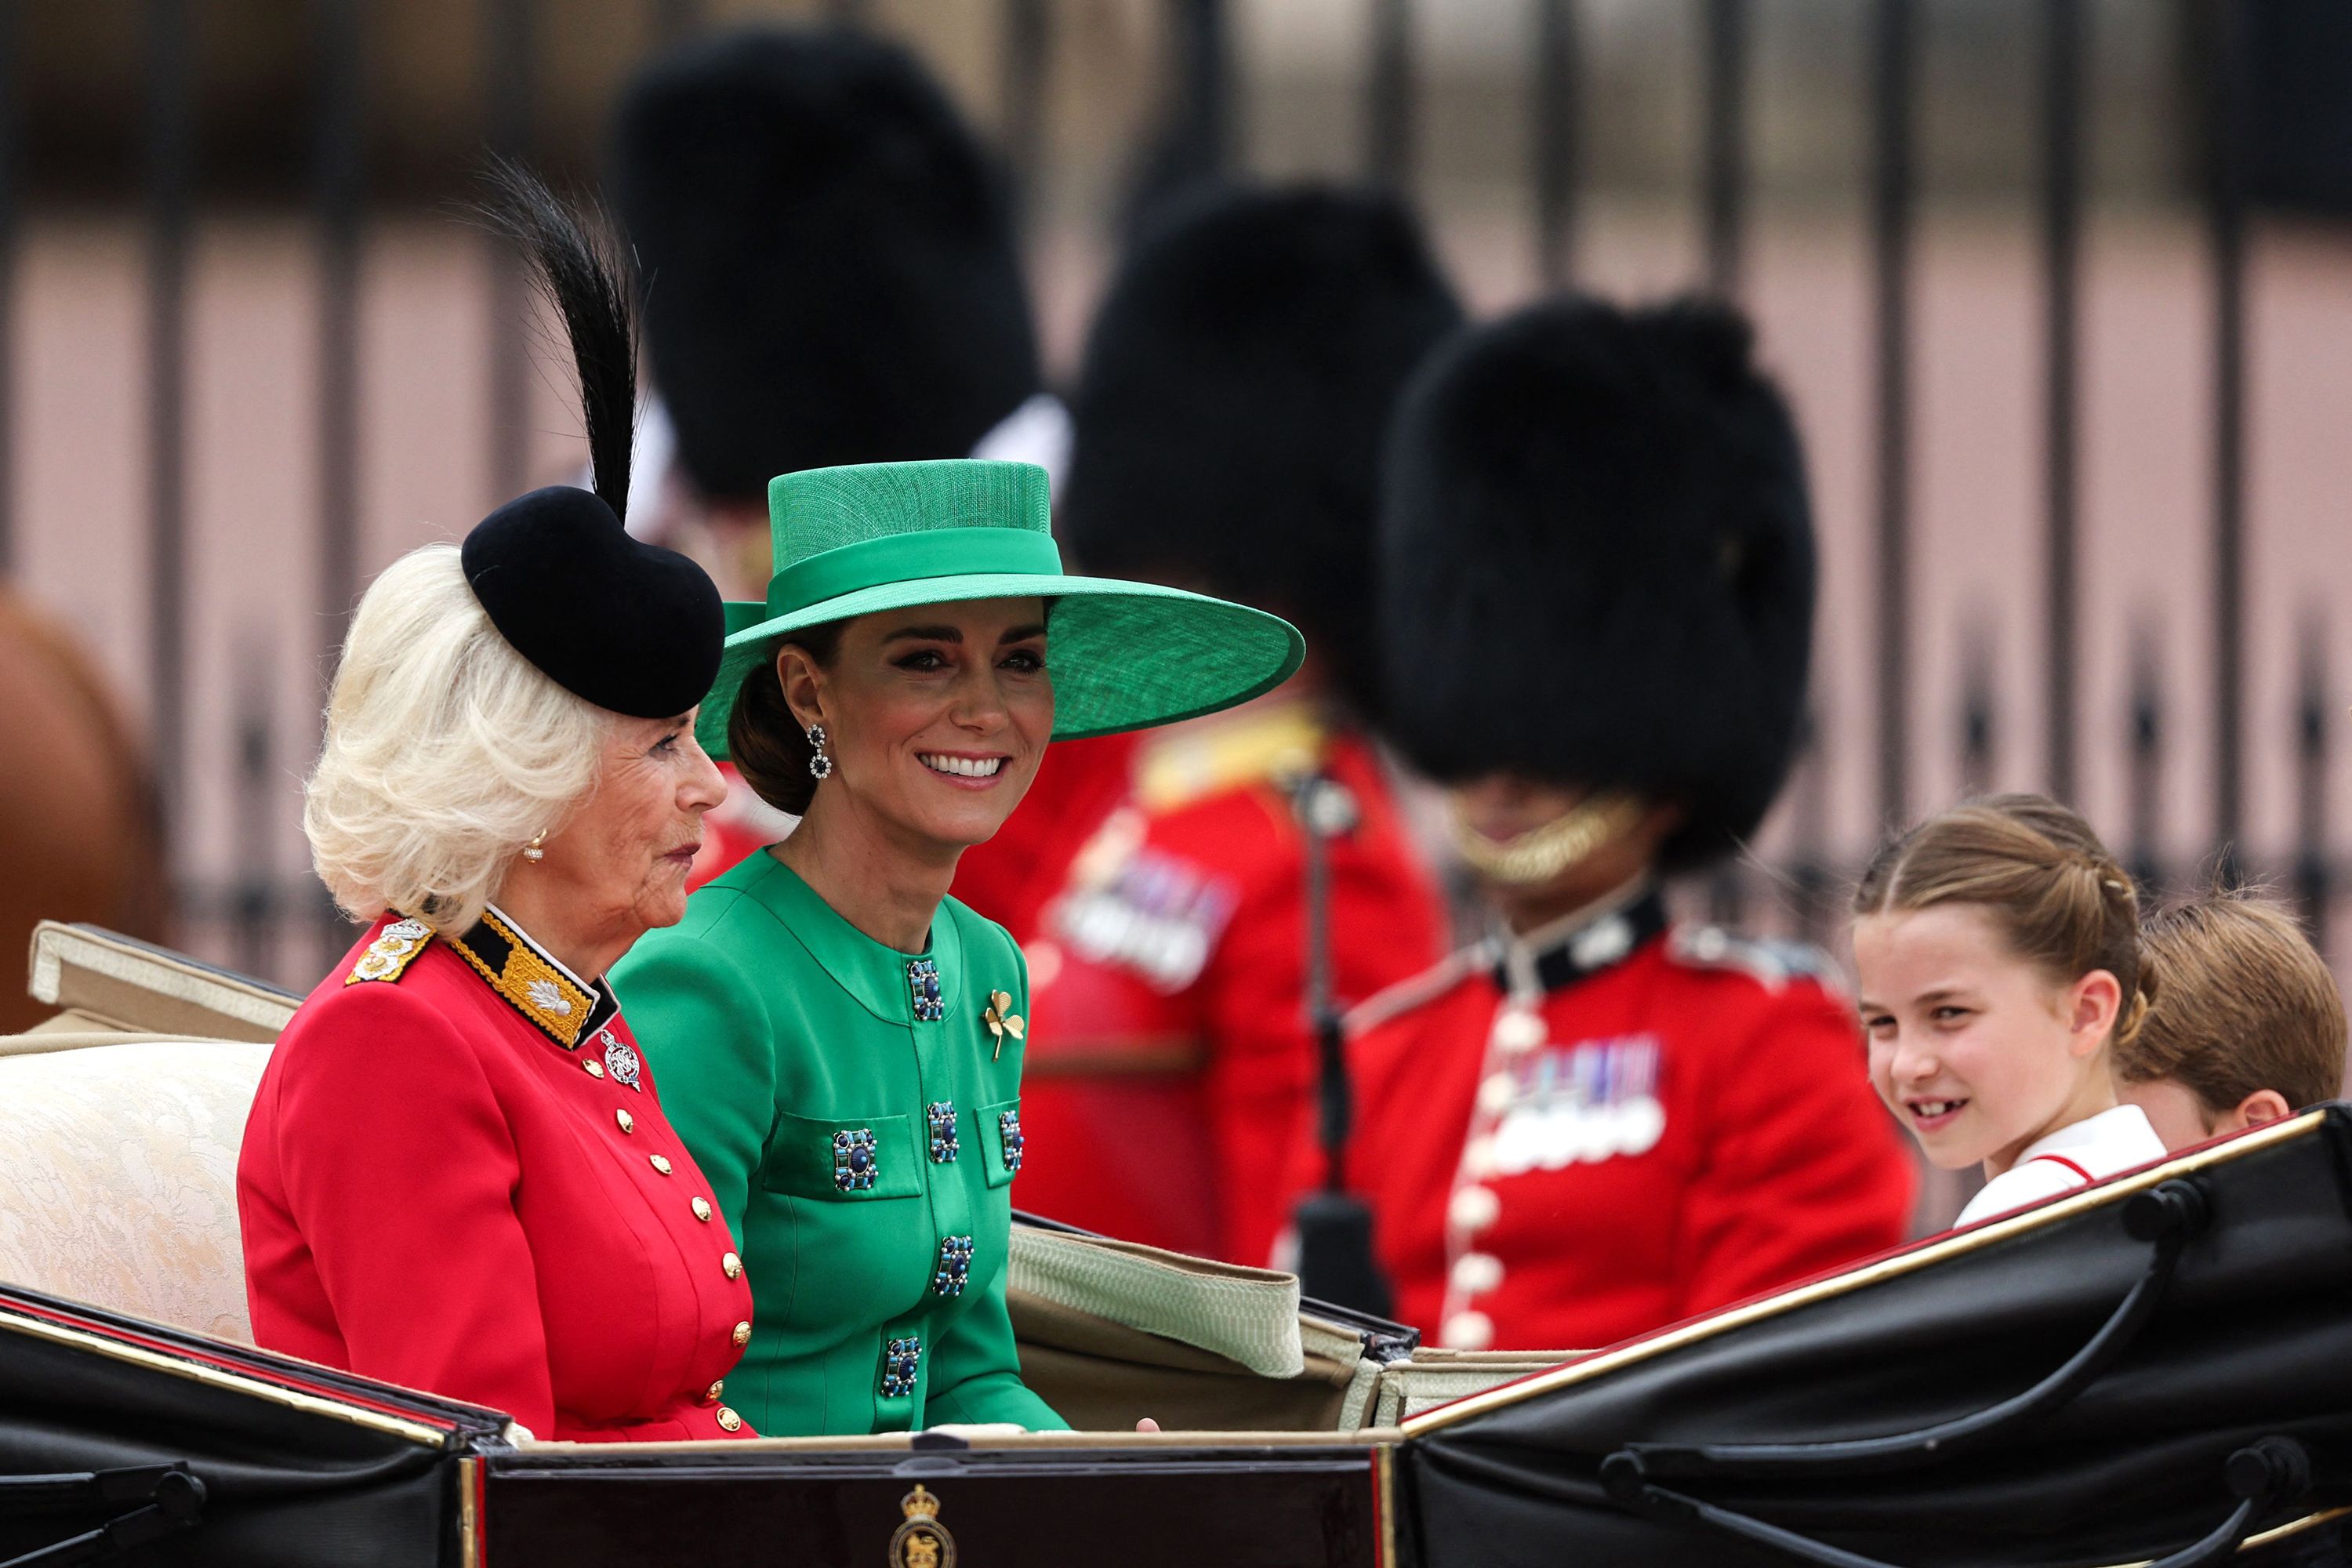 King Charles Celebrates First Trooping the Colour of His Reign